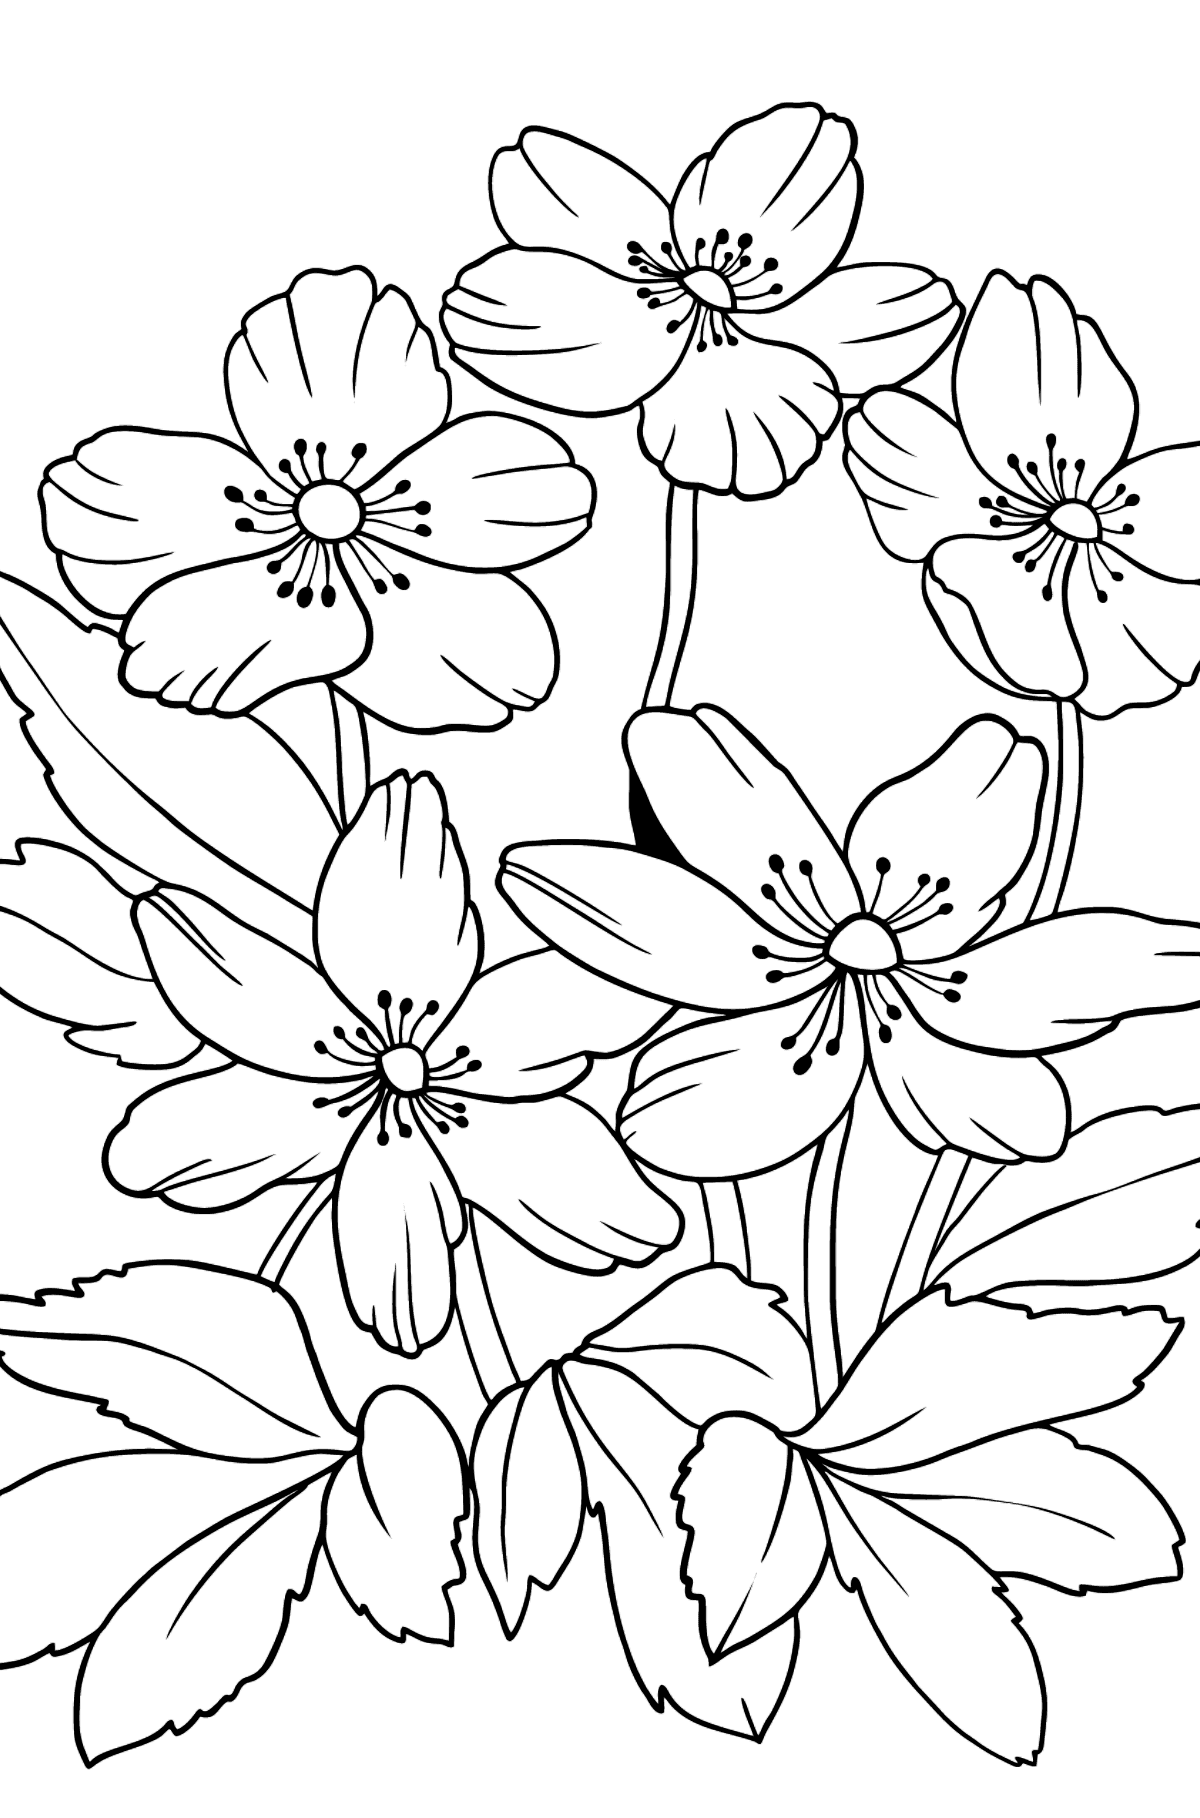 Flower Coloring Page - A Windflower with Yellow Petals - Coloring Pages for Kids